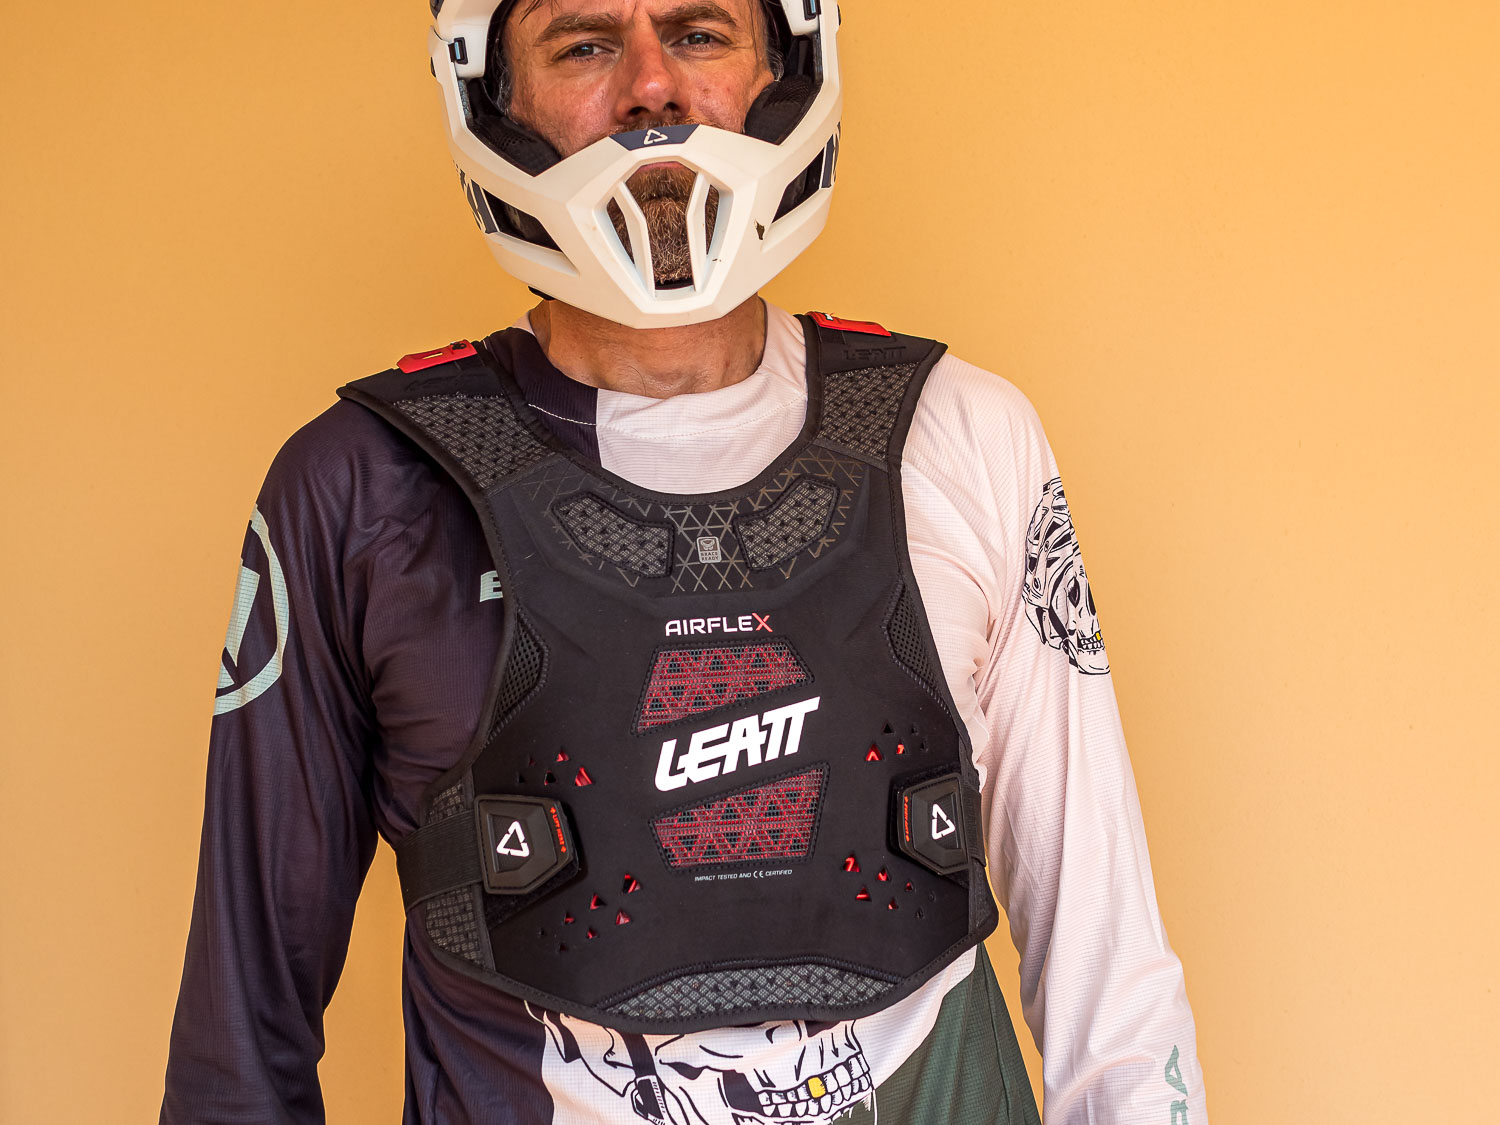 Leatt Chest Protector Airflex il nostro test - 4ActionSport